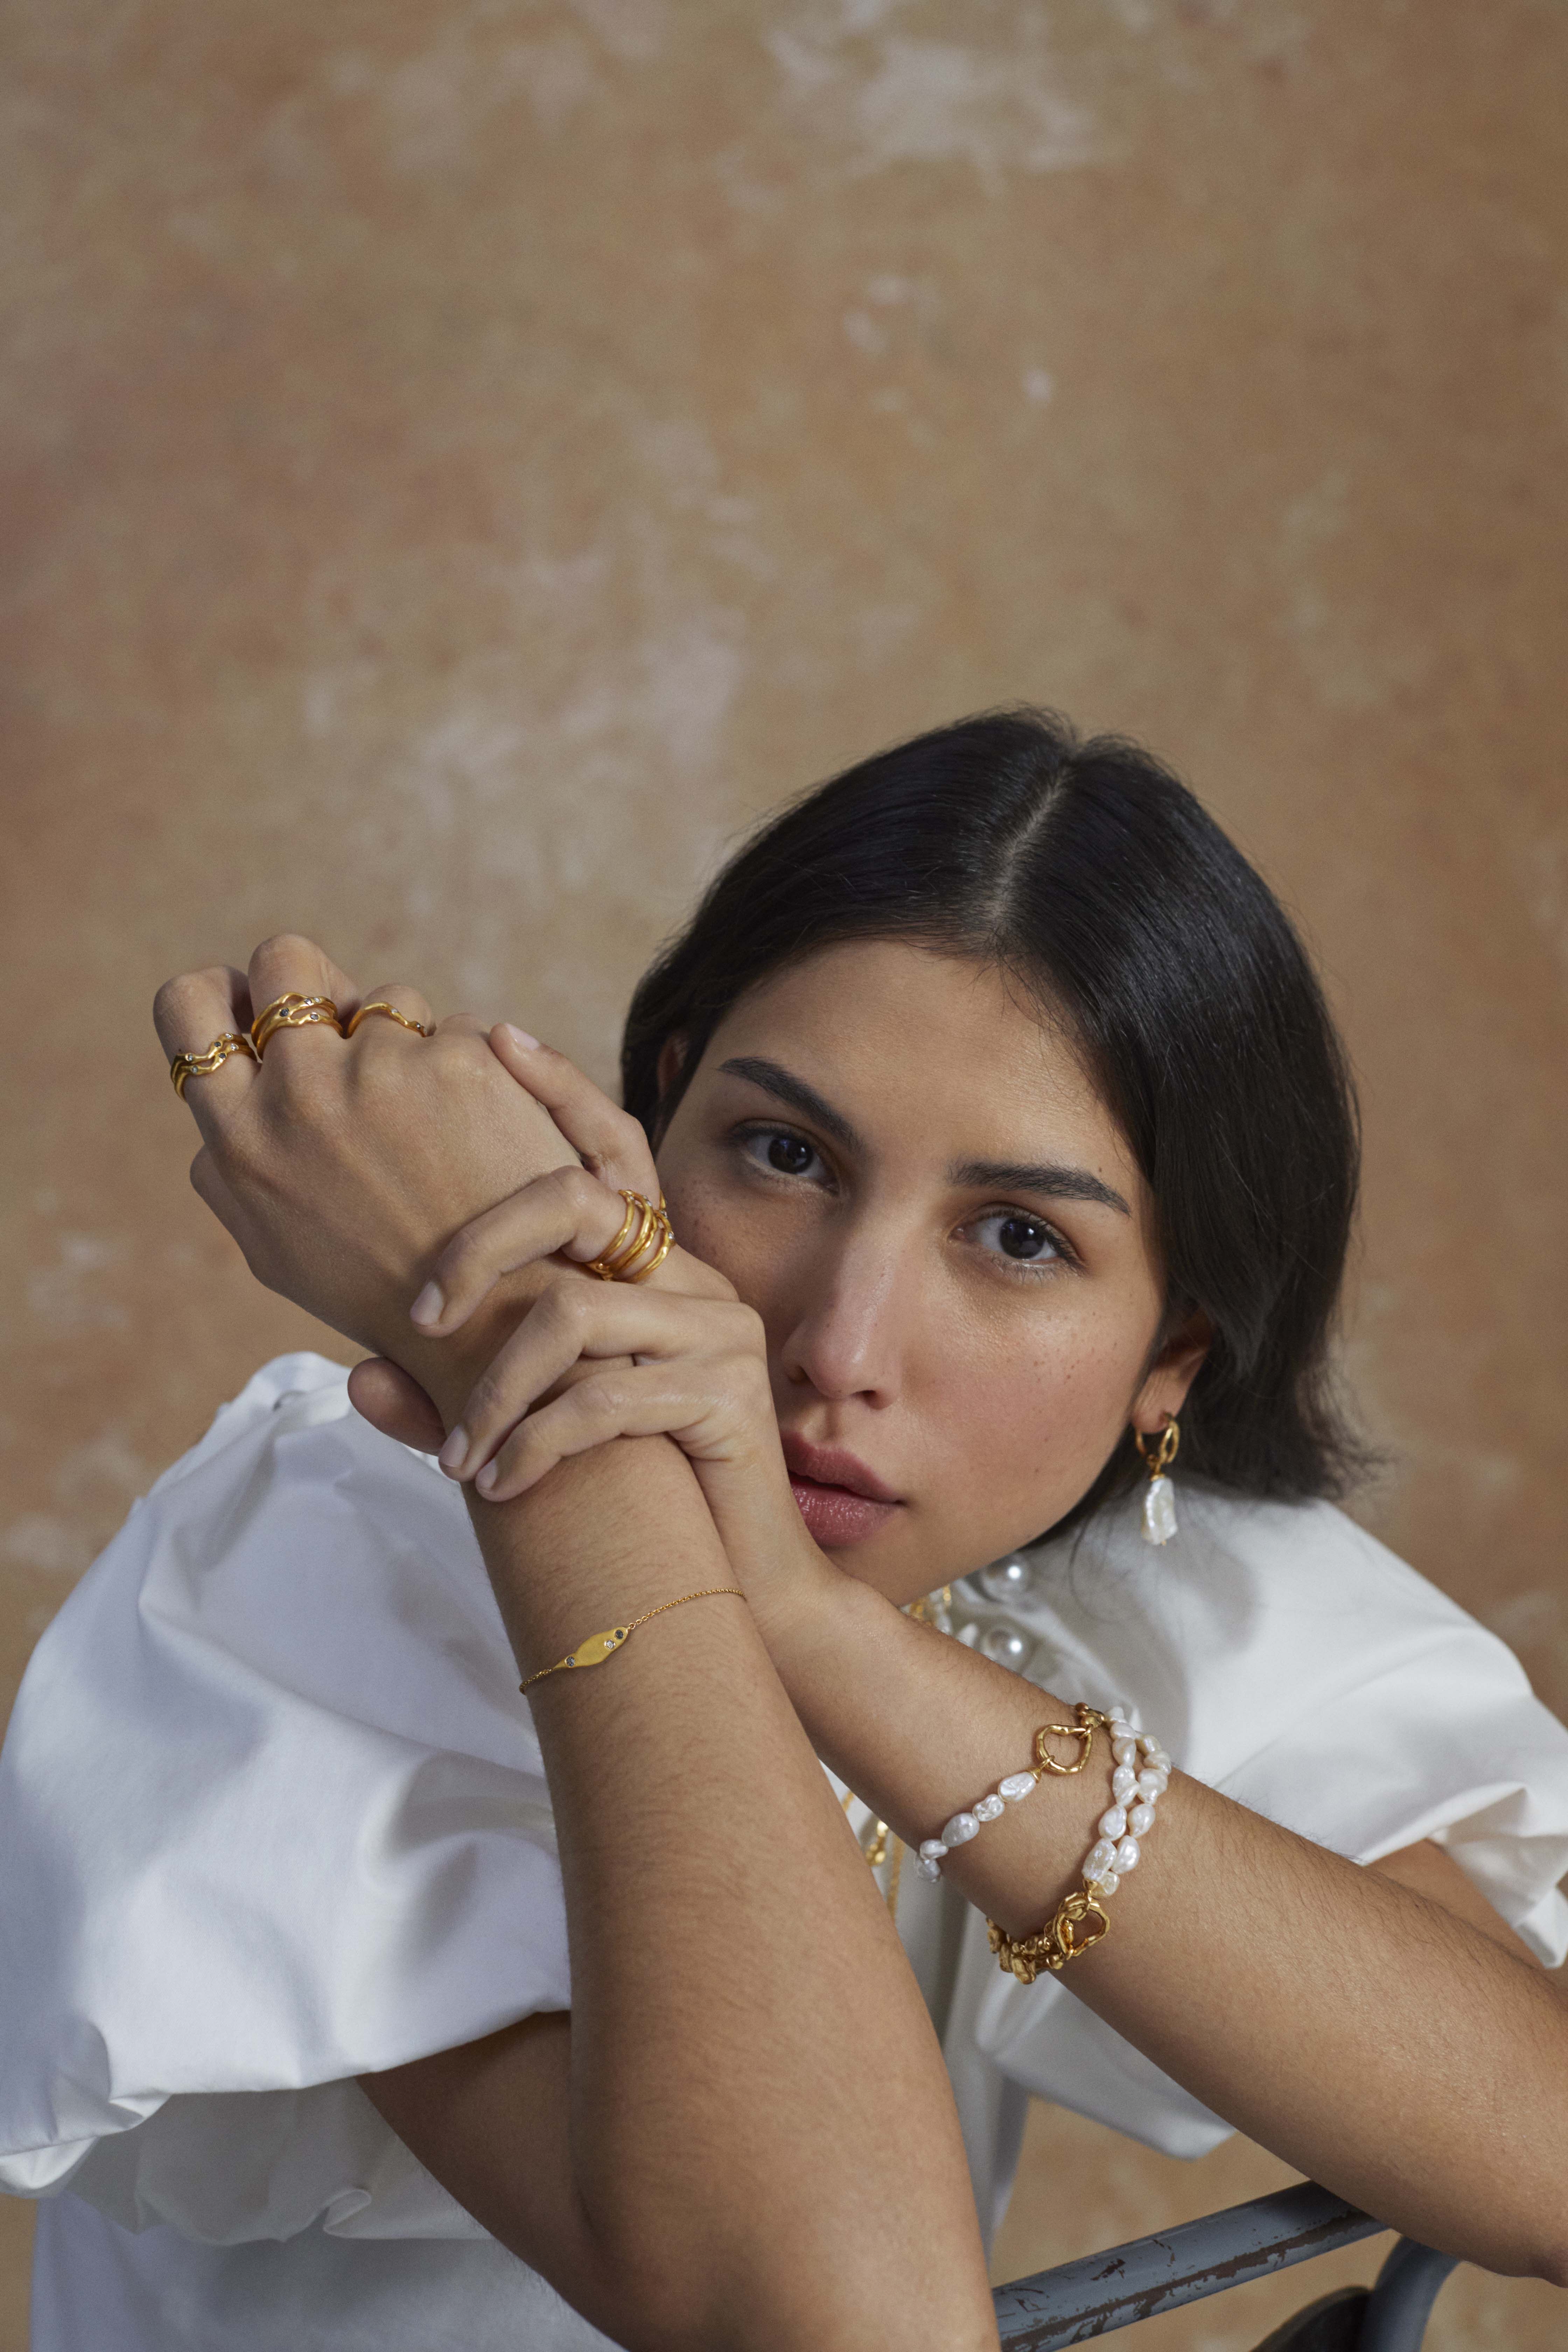 Monica Vinader's Mother Of Pearl jewellery collaboration is here